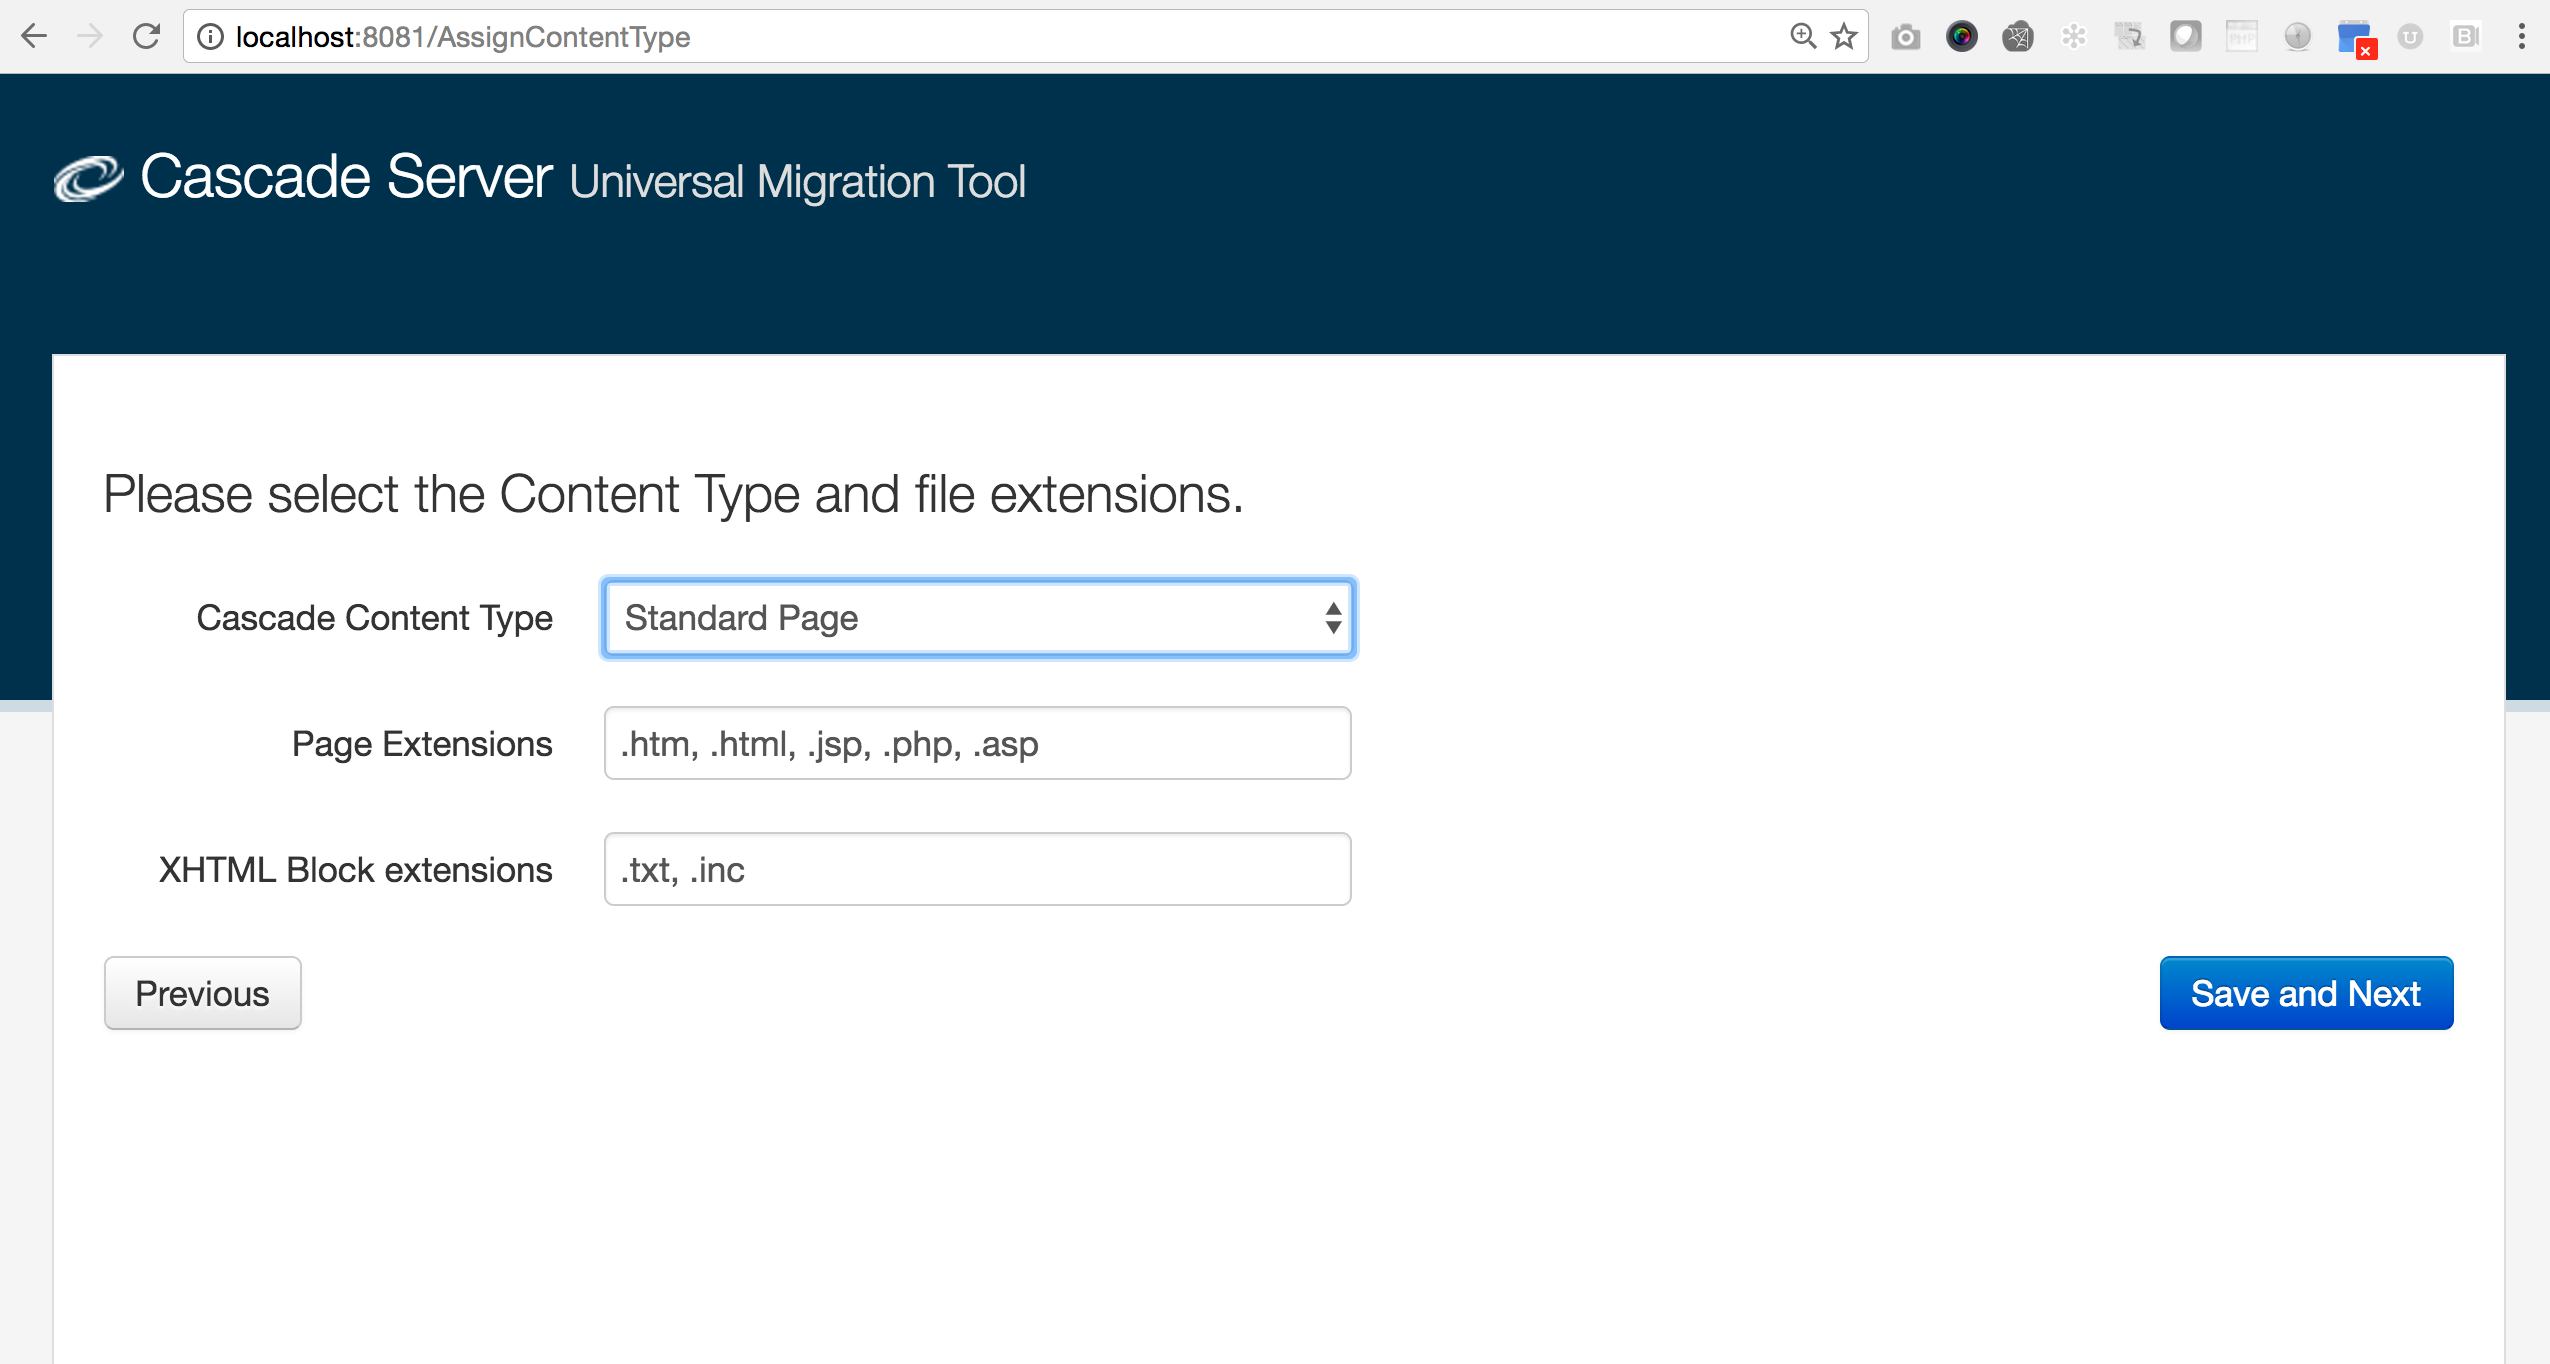 migration tool screenshot of page type chooser